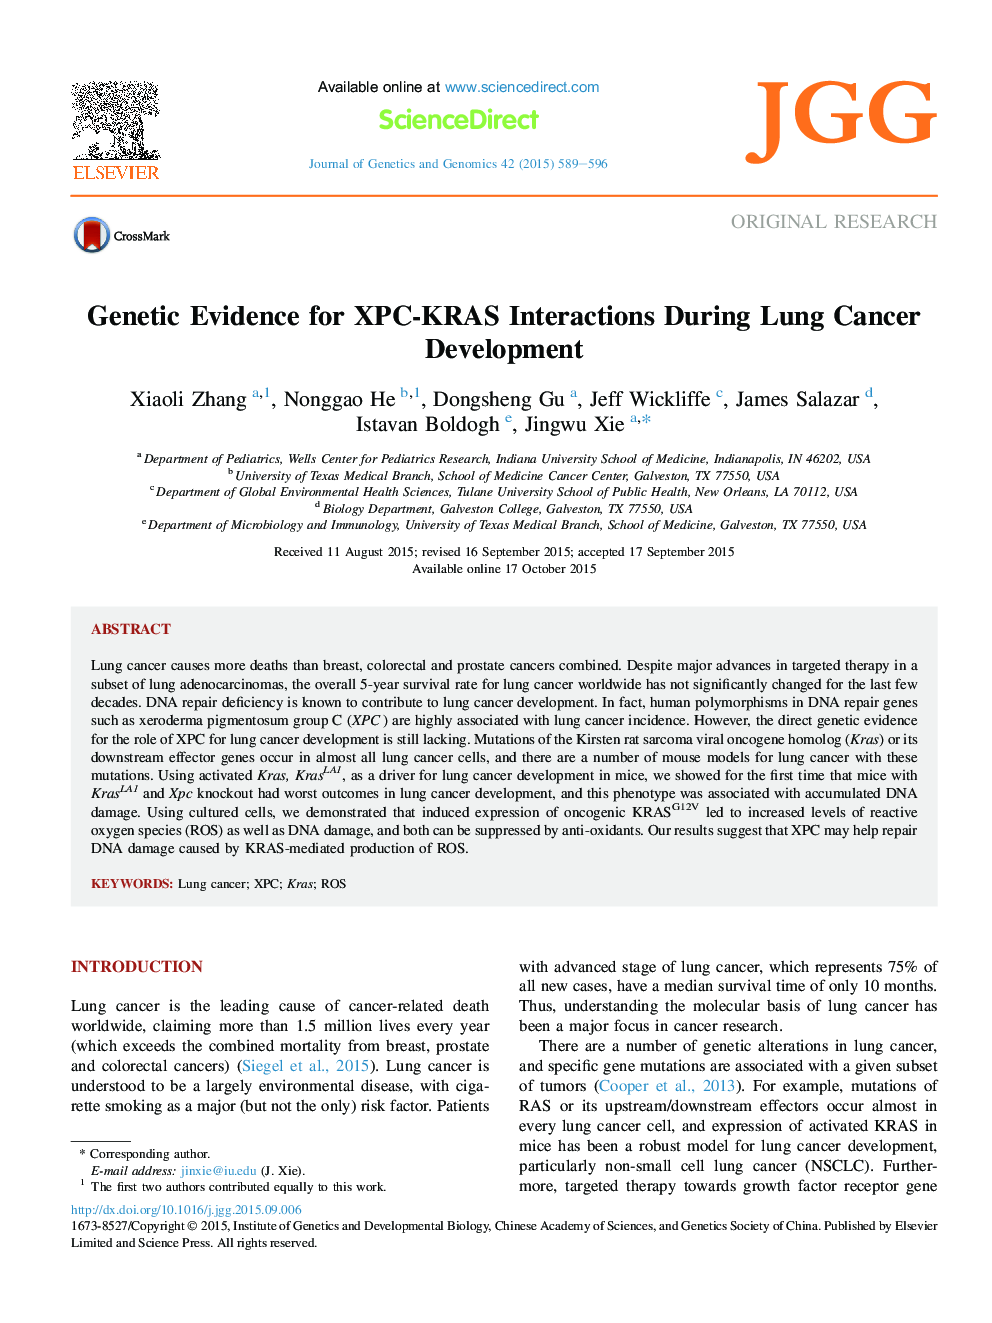 Genetic Evidence for XPC-KRAS Interactions During Lung Cancer Development